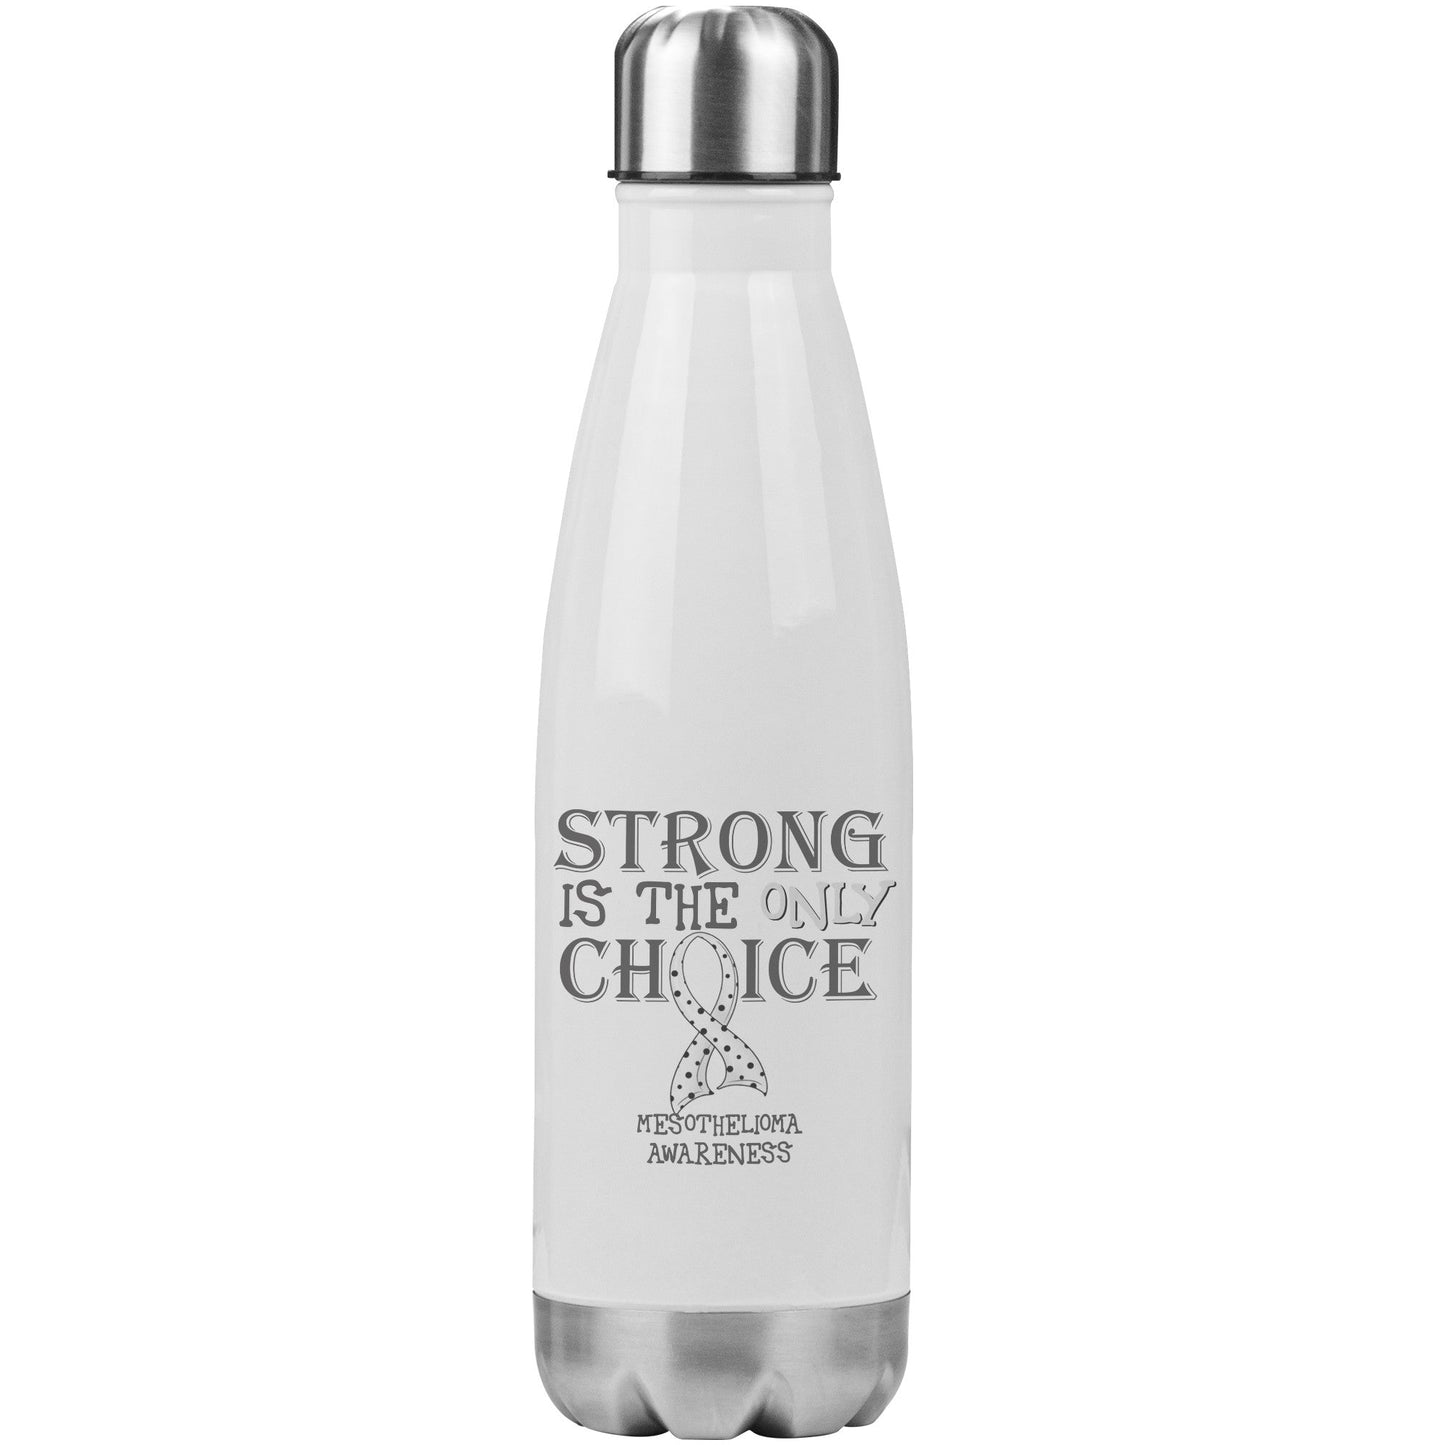 Strong is the Only Choice -Mesothelioma Awareness 20oz Insulated Water Bottle |x|